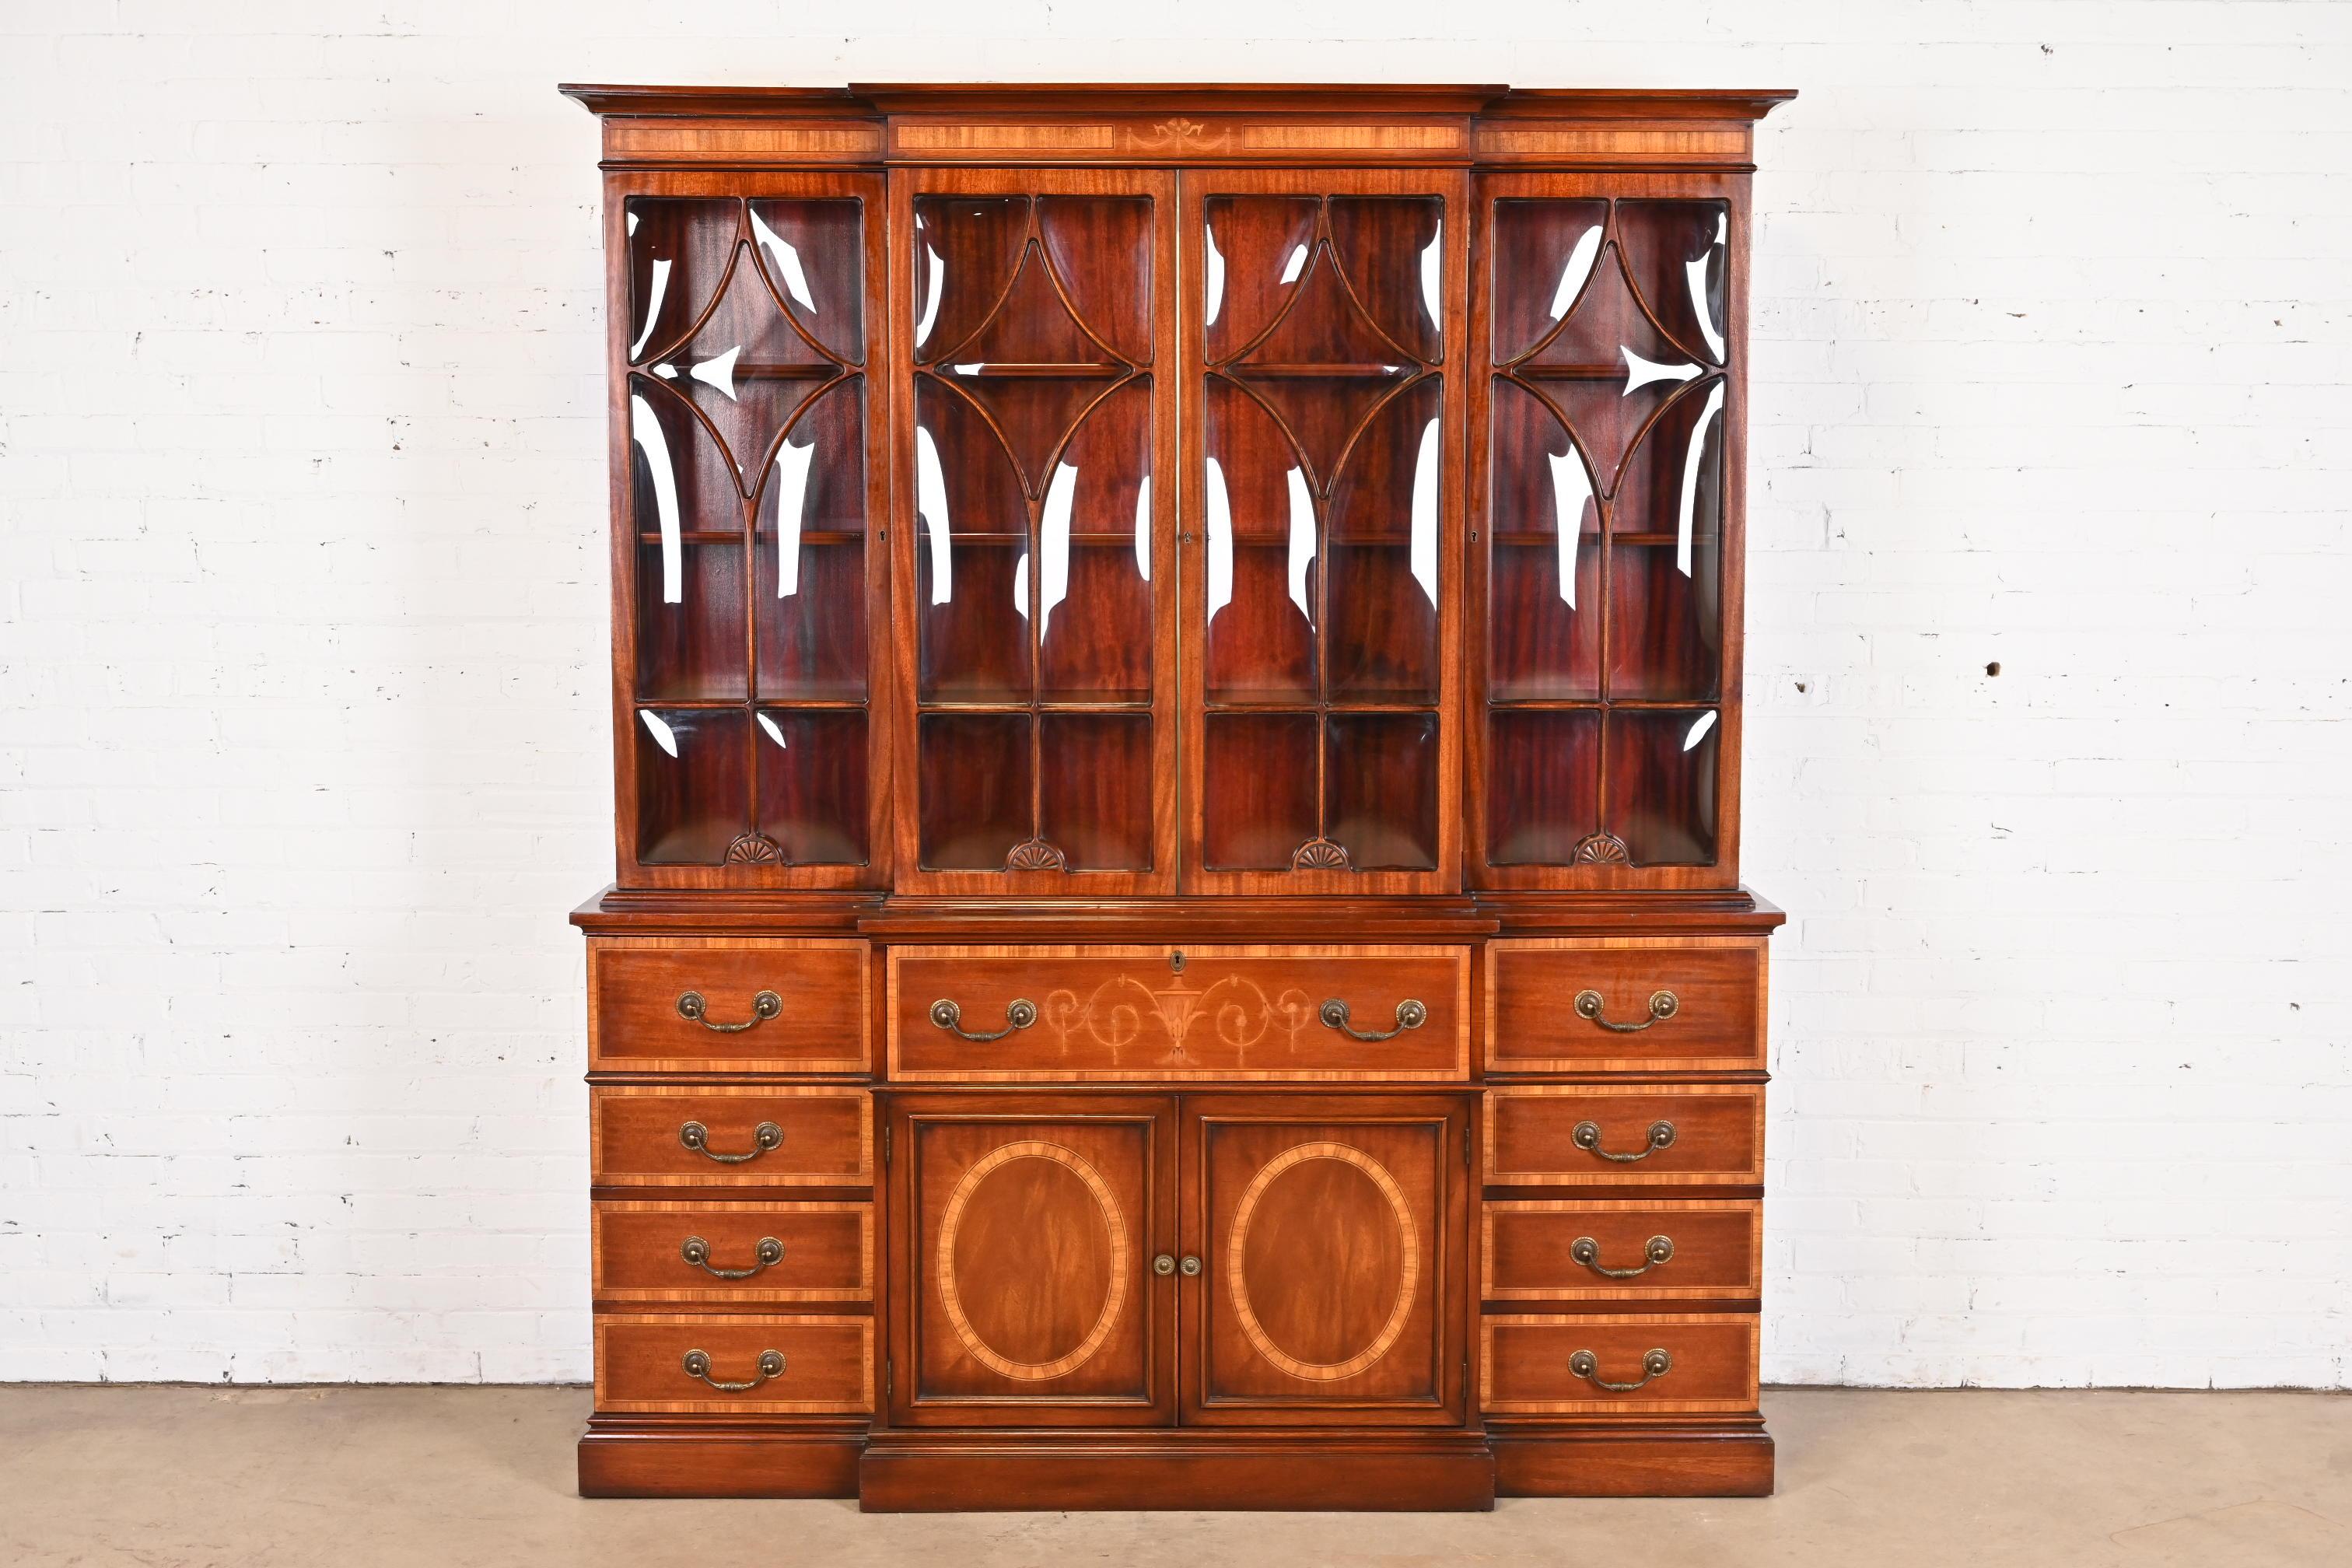 A gorgeous Georgian or Sheraton style breakfront bookcase or china cabinet with drop front secretary desk

In the manner of Baker Furniture

USA, Circa Mid-20th Century

Mahogany, with inlaid satinwood banding and marquetry, mullioned bubble glass